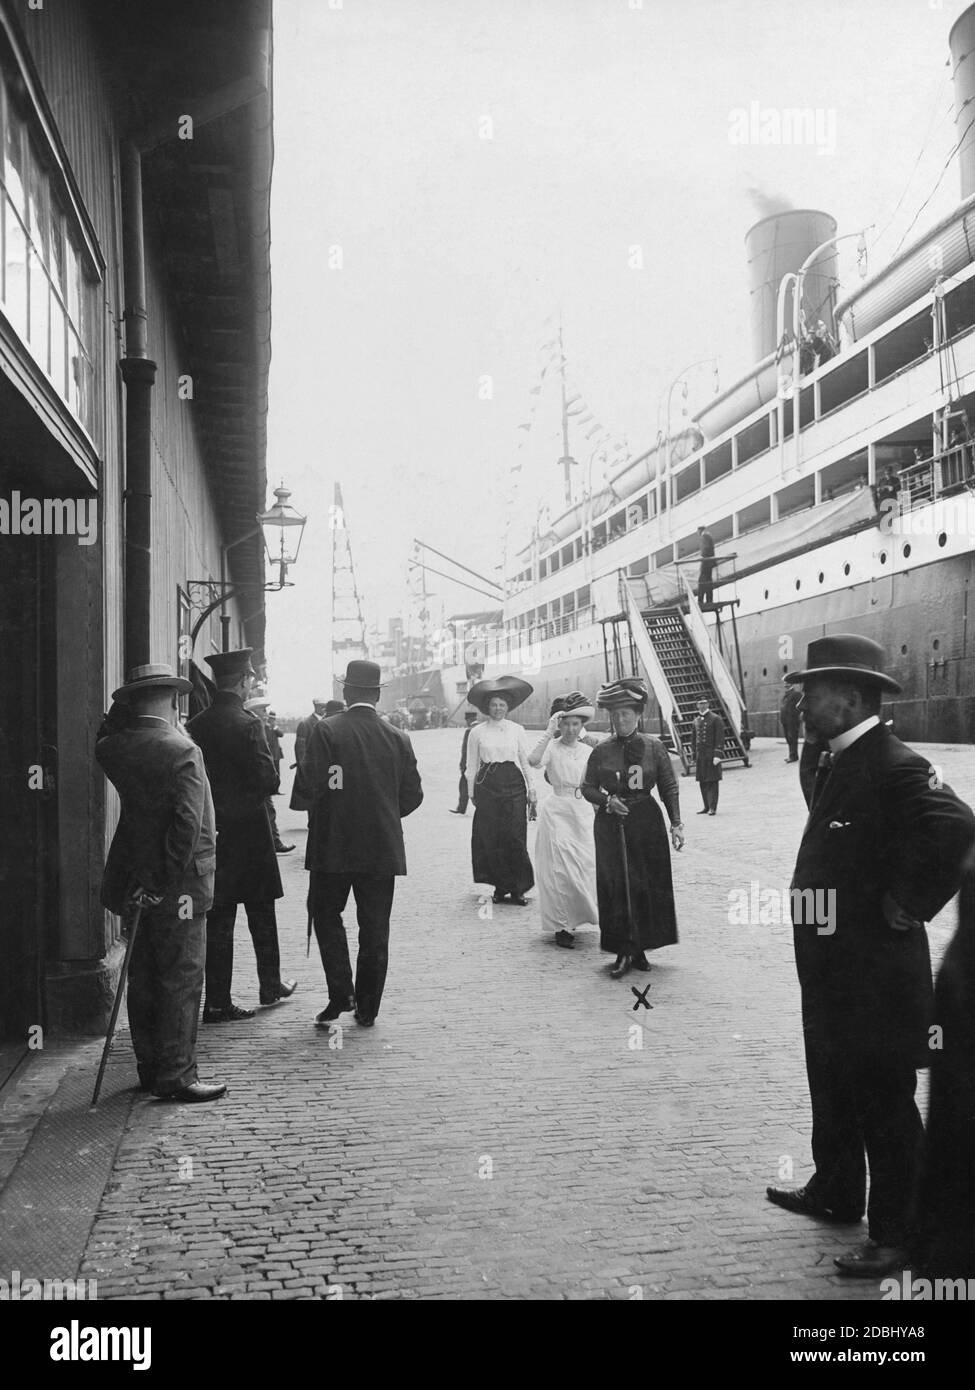 'Princess Irene of Prussia (nee Hesse-Darmstadt, wearing a black dress in the centre of the picture) was a prominent guest of the last Prinz-Heinrich-Fahrt in 1911, which had been sponsored by her husband Henry of Prussia. Here she is in Bremerhaven. On the right is the imperial mail steamer ''Grosser Kurfuerst'' of the Norddeutscher Lloyd, aboard which Henry of Prussia was also in Southampton during this voyage.' Stock Photo